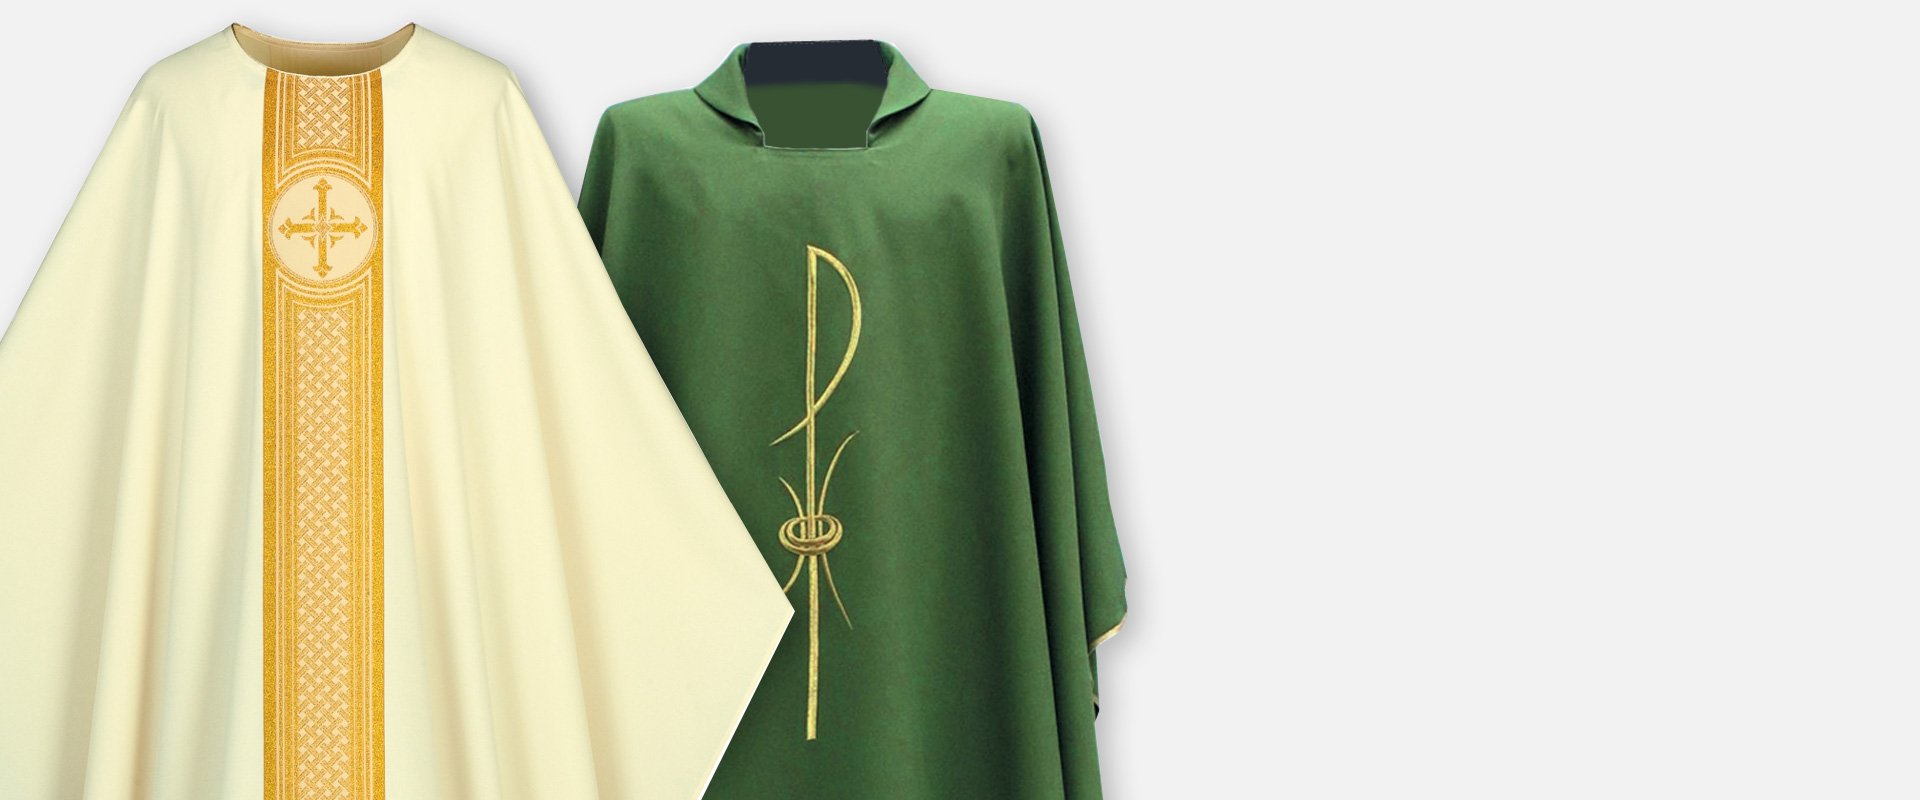 Clergy Shirts, Alb's, Chasubles and more Religious Apparel